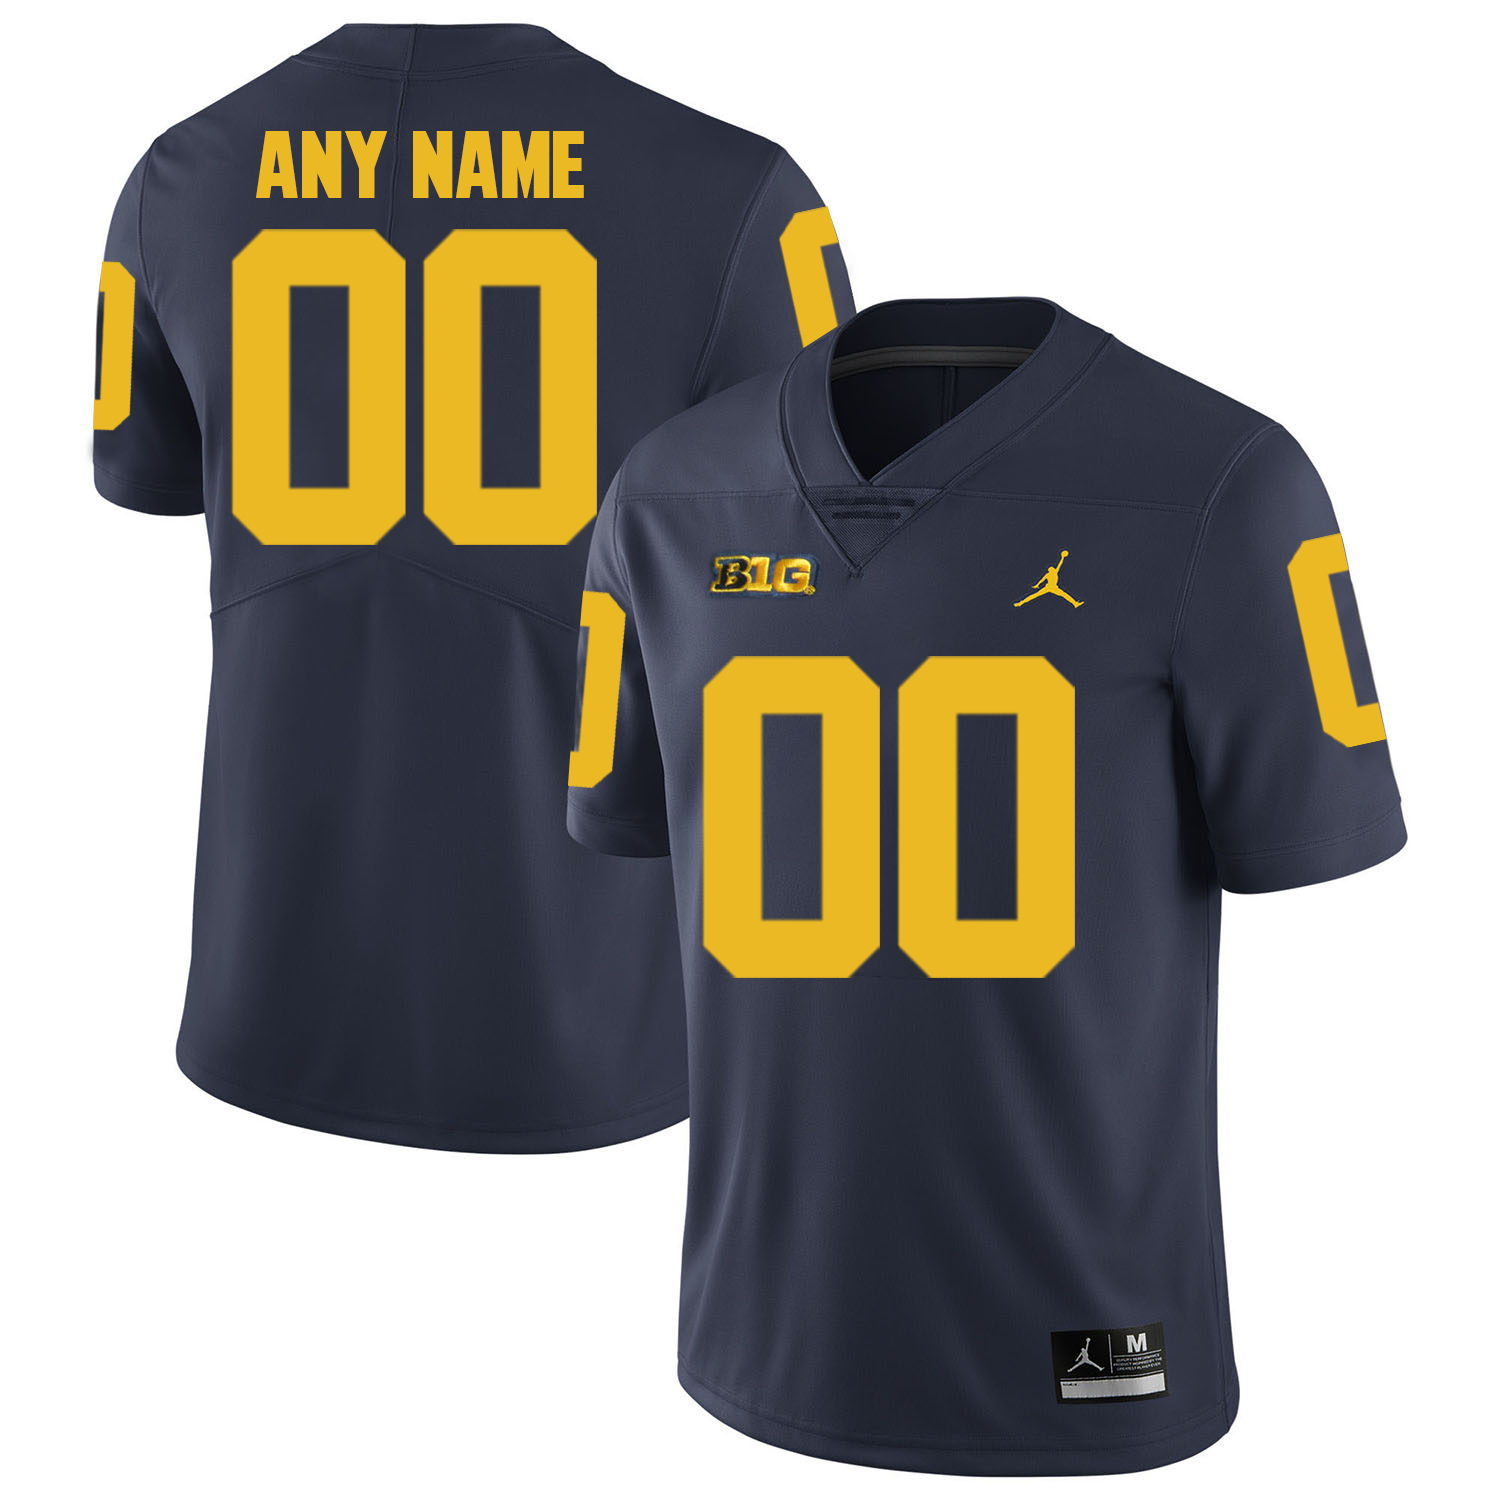 Michigan Wolverines Navy Men's Customized College Football Jersey